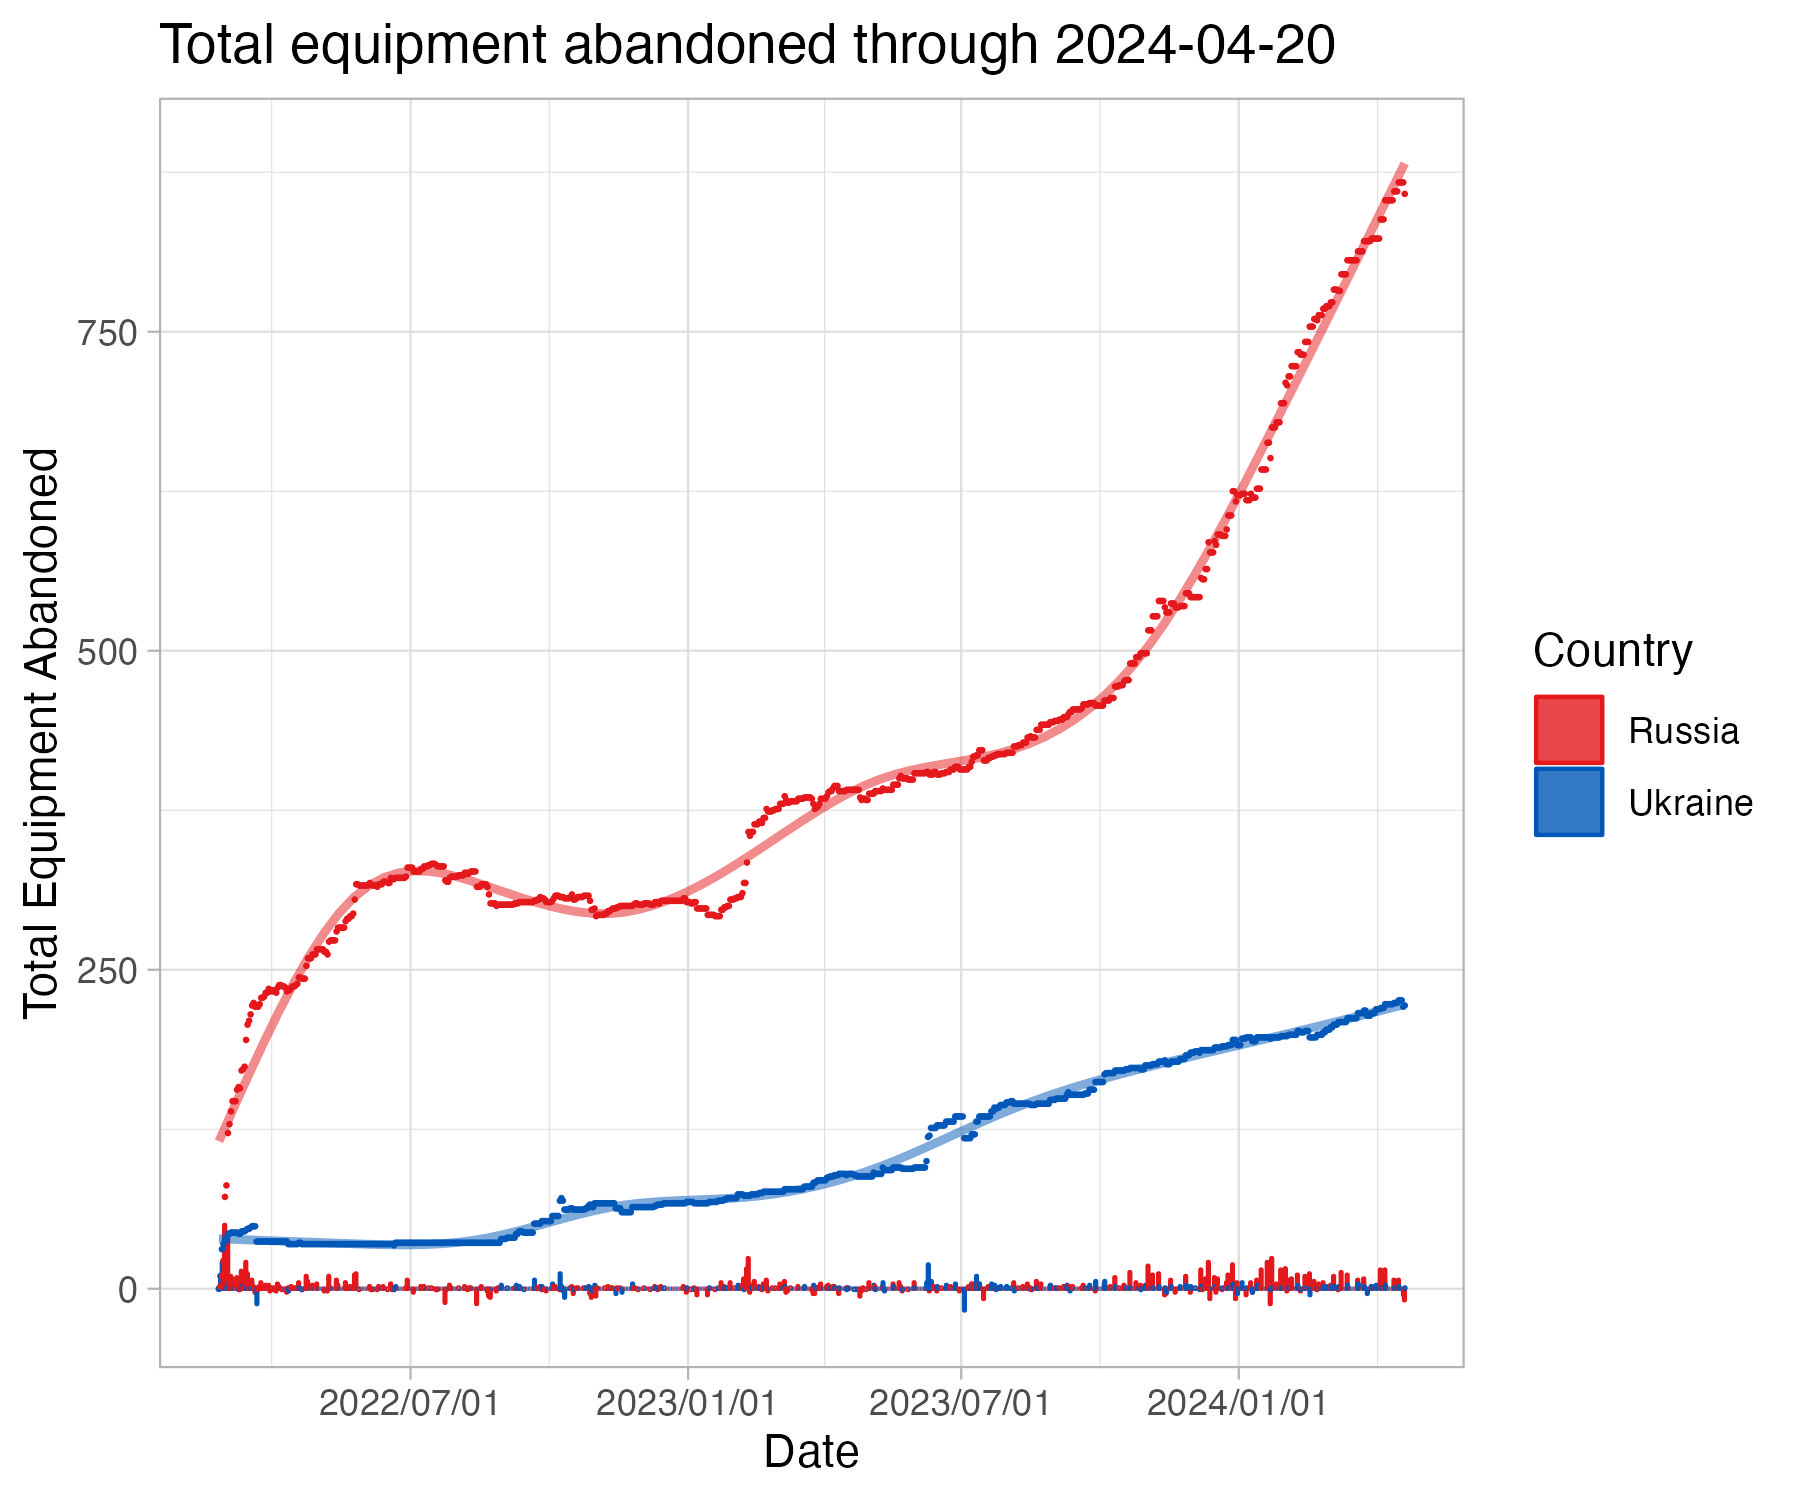 Total equipment abandoned through 2024-04-20